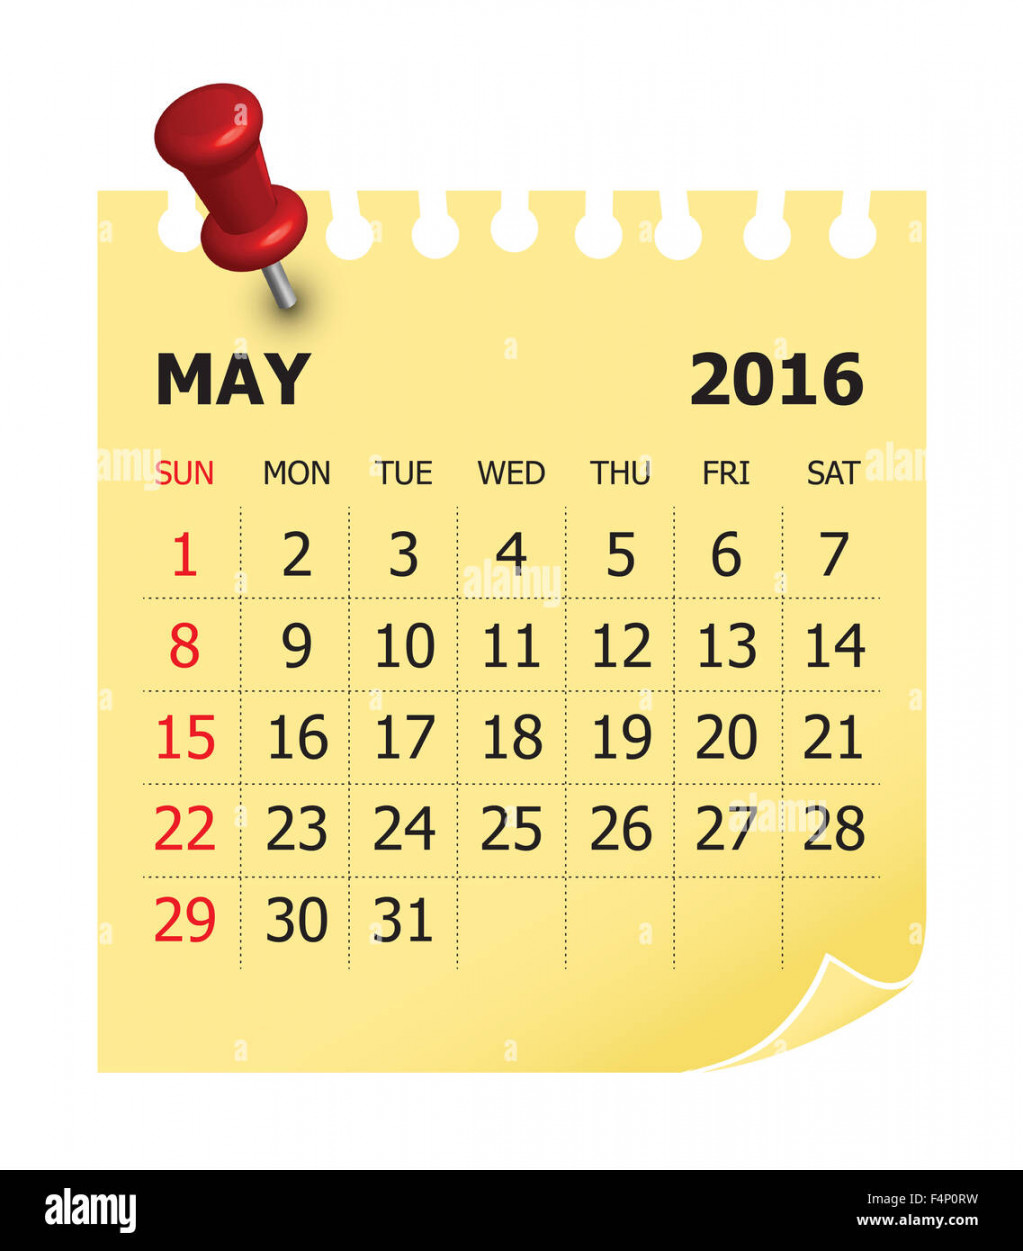 Simple calendar for May  Stock Photo - Alamy